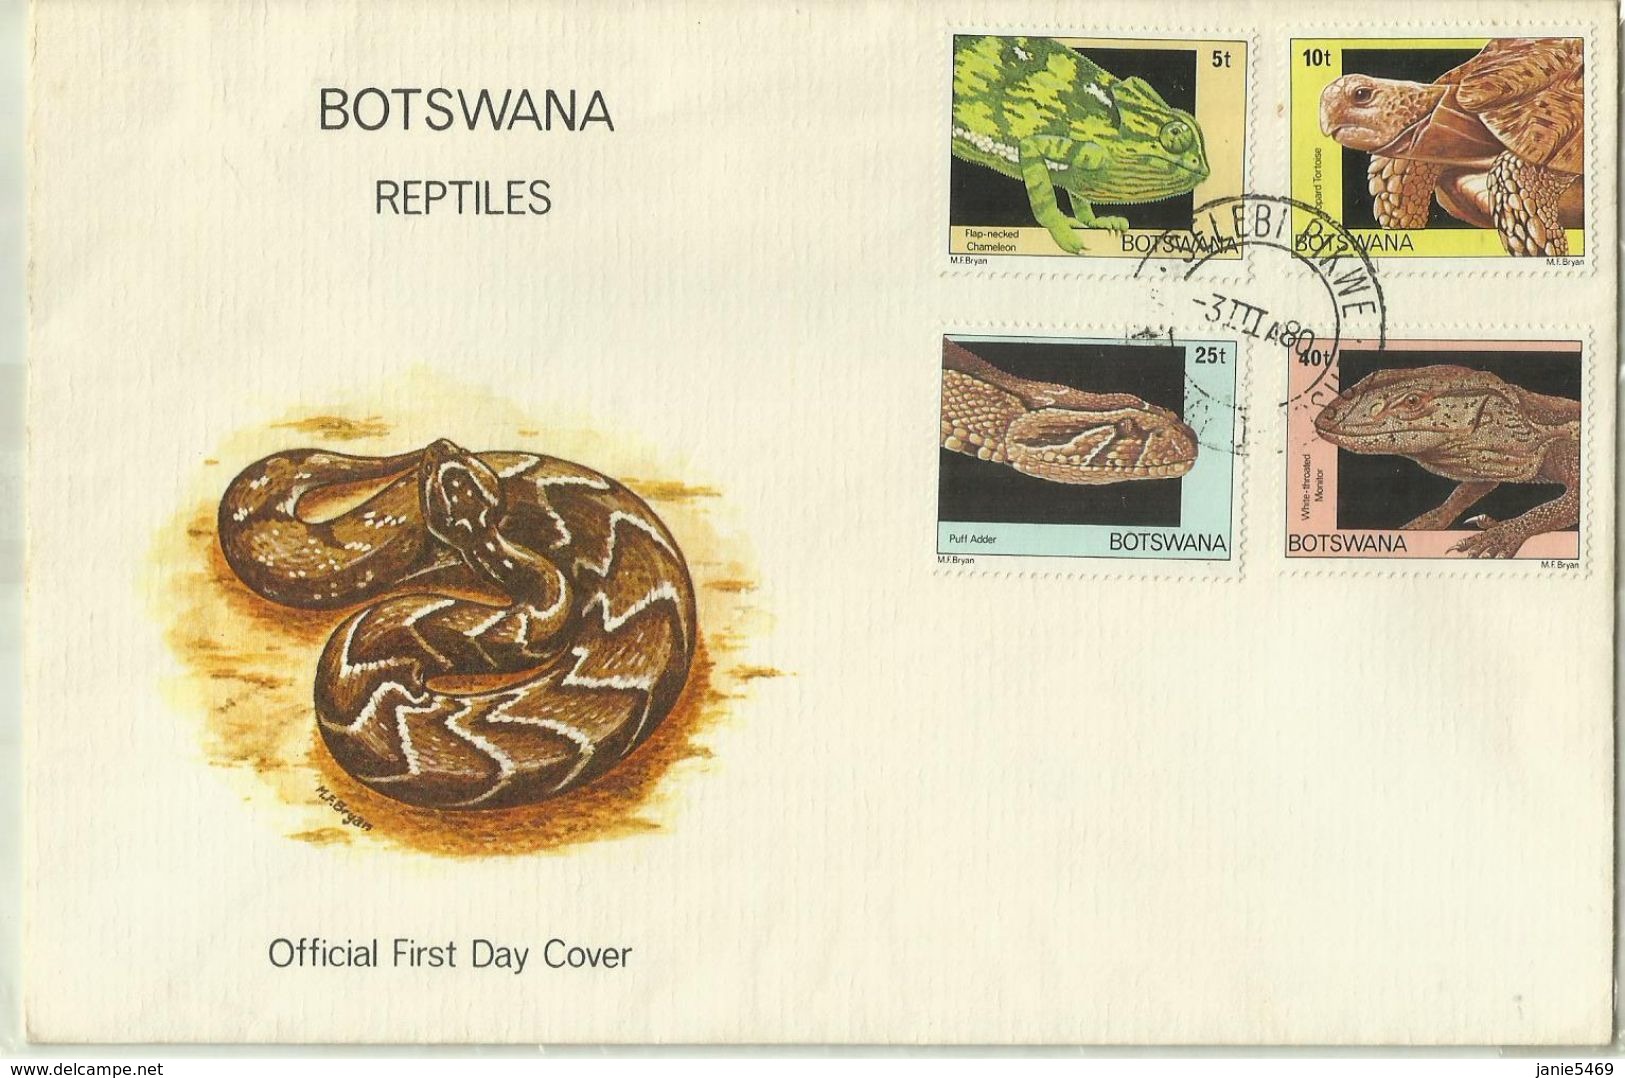 South Africa Botswana 1980 Reptiles,First Day Cover - Bophuthatswana